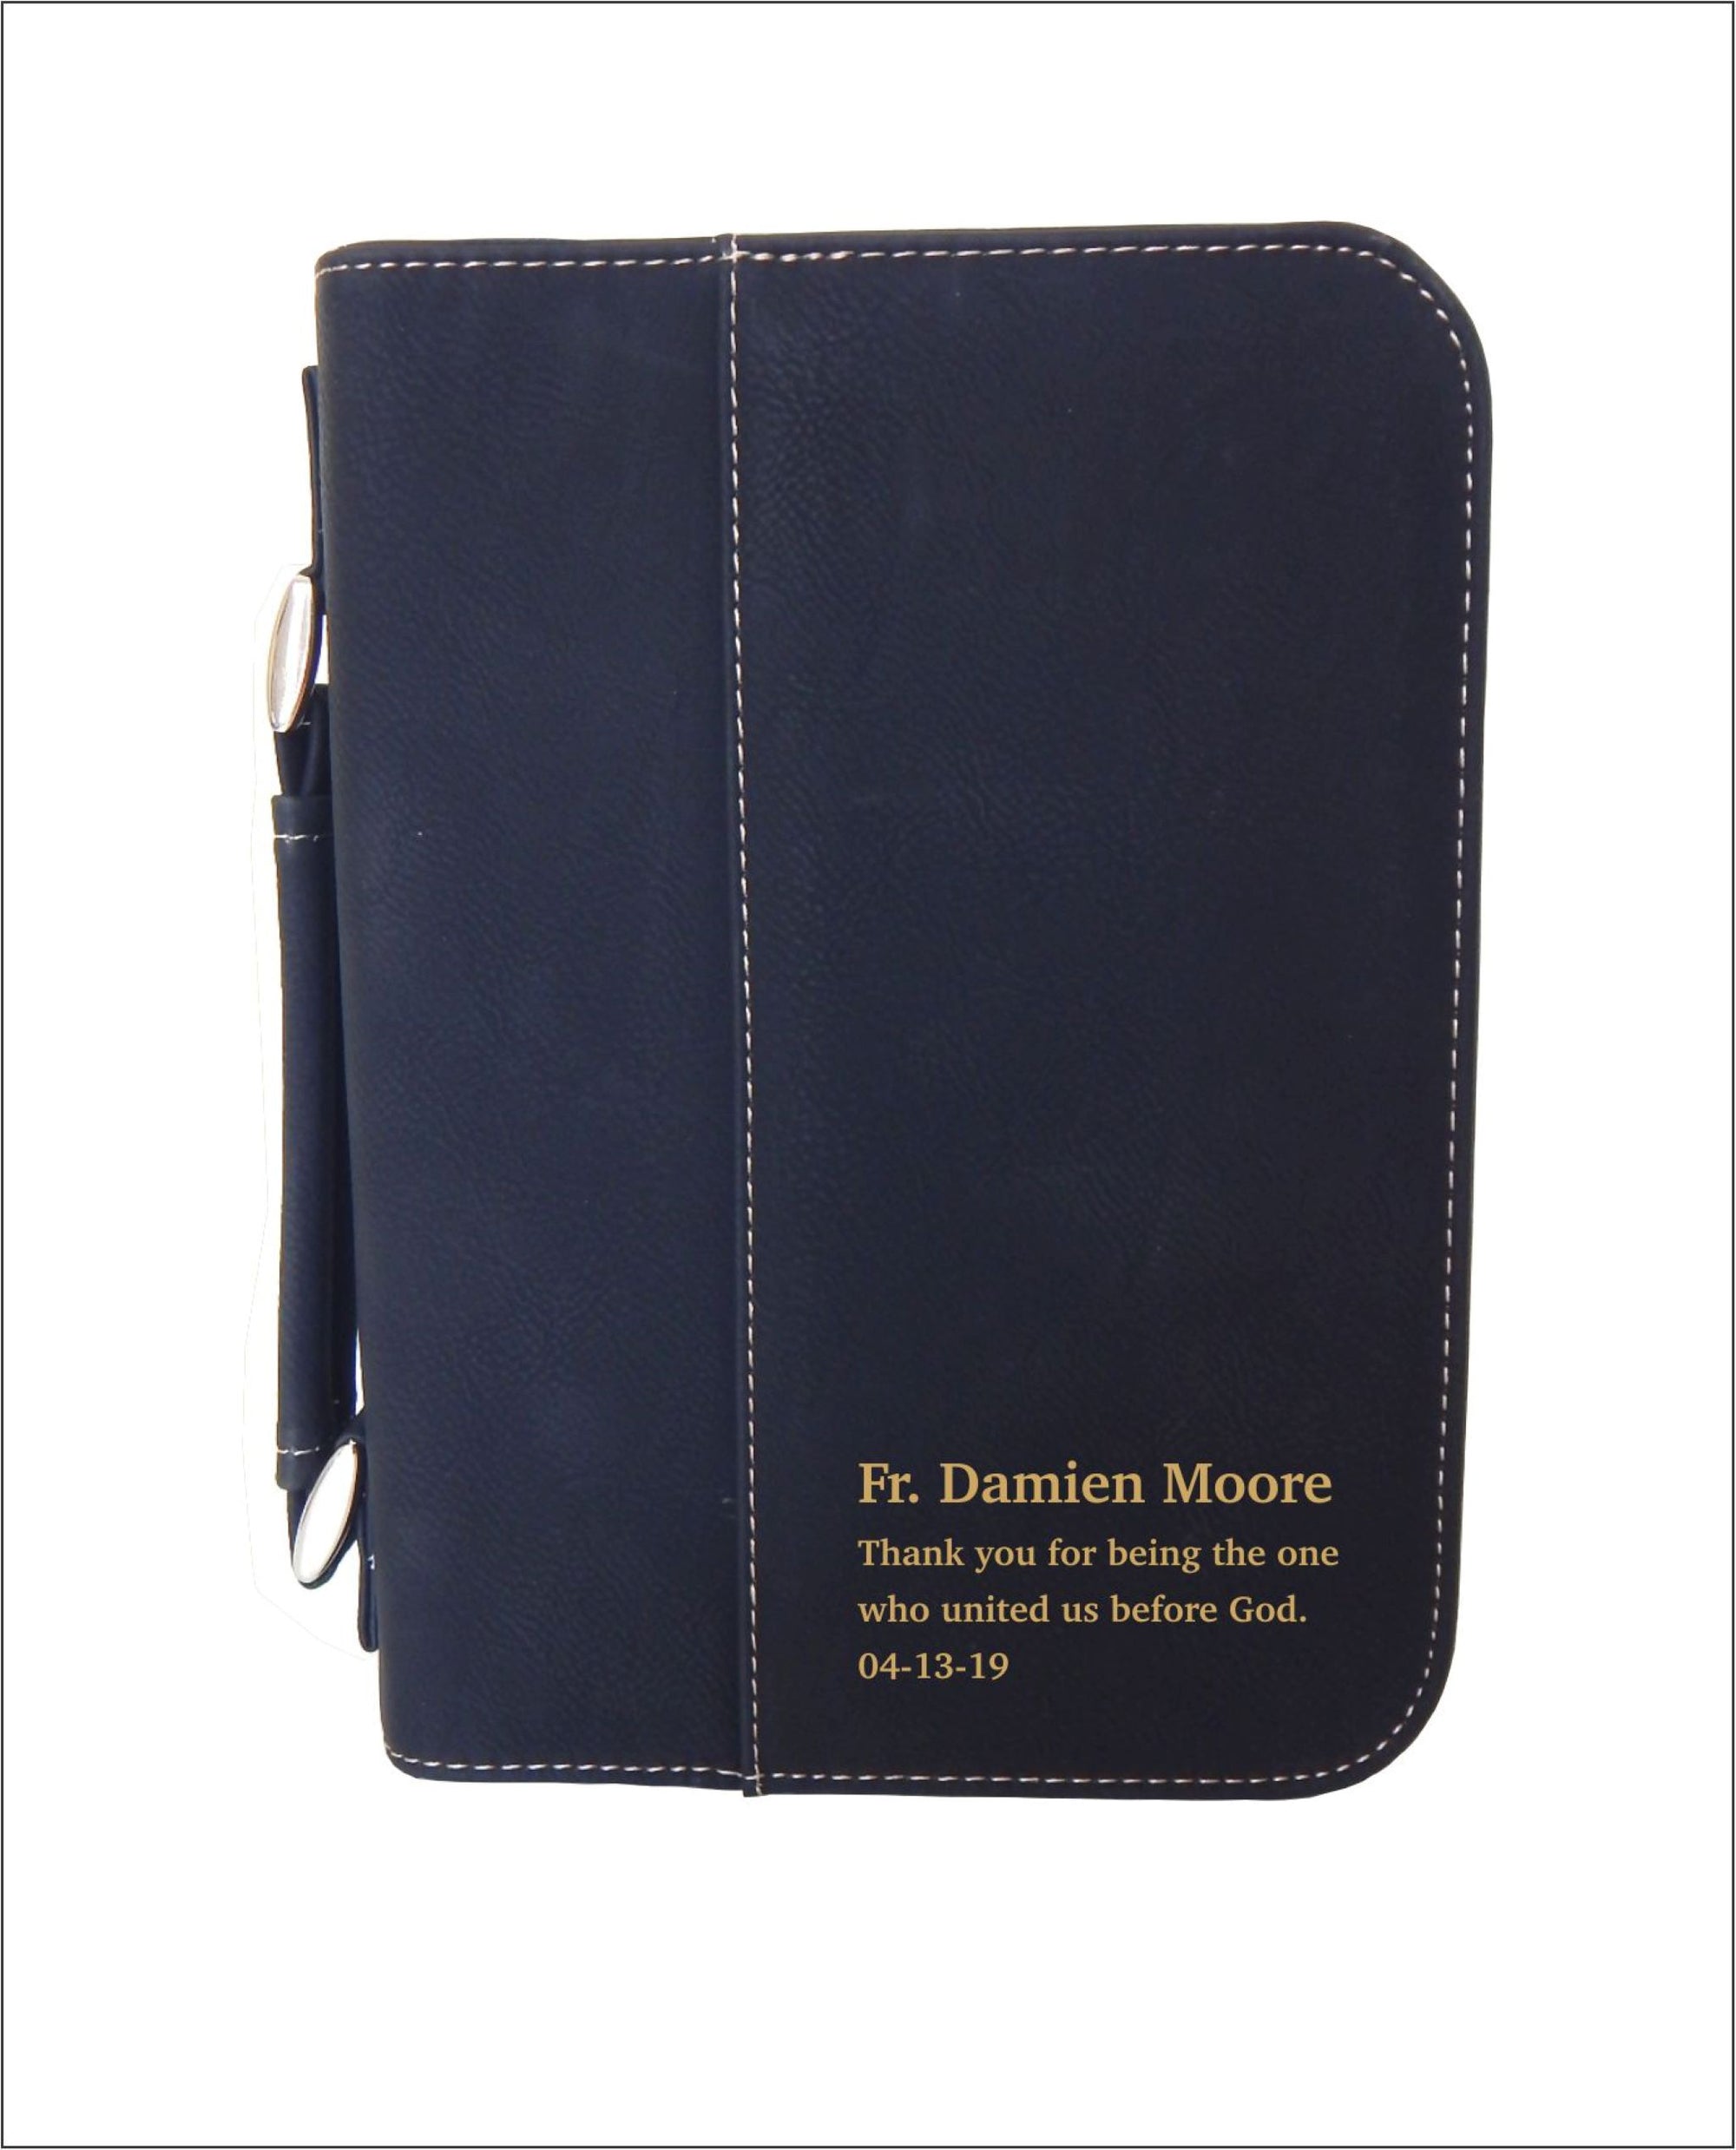 Catholic Priest Gift | Wedding Officiant Gift | Personalized Bible Cover